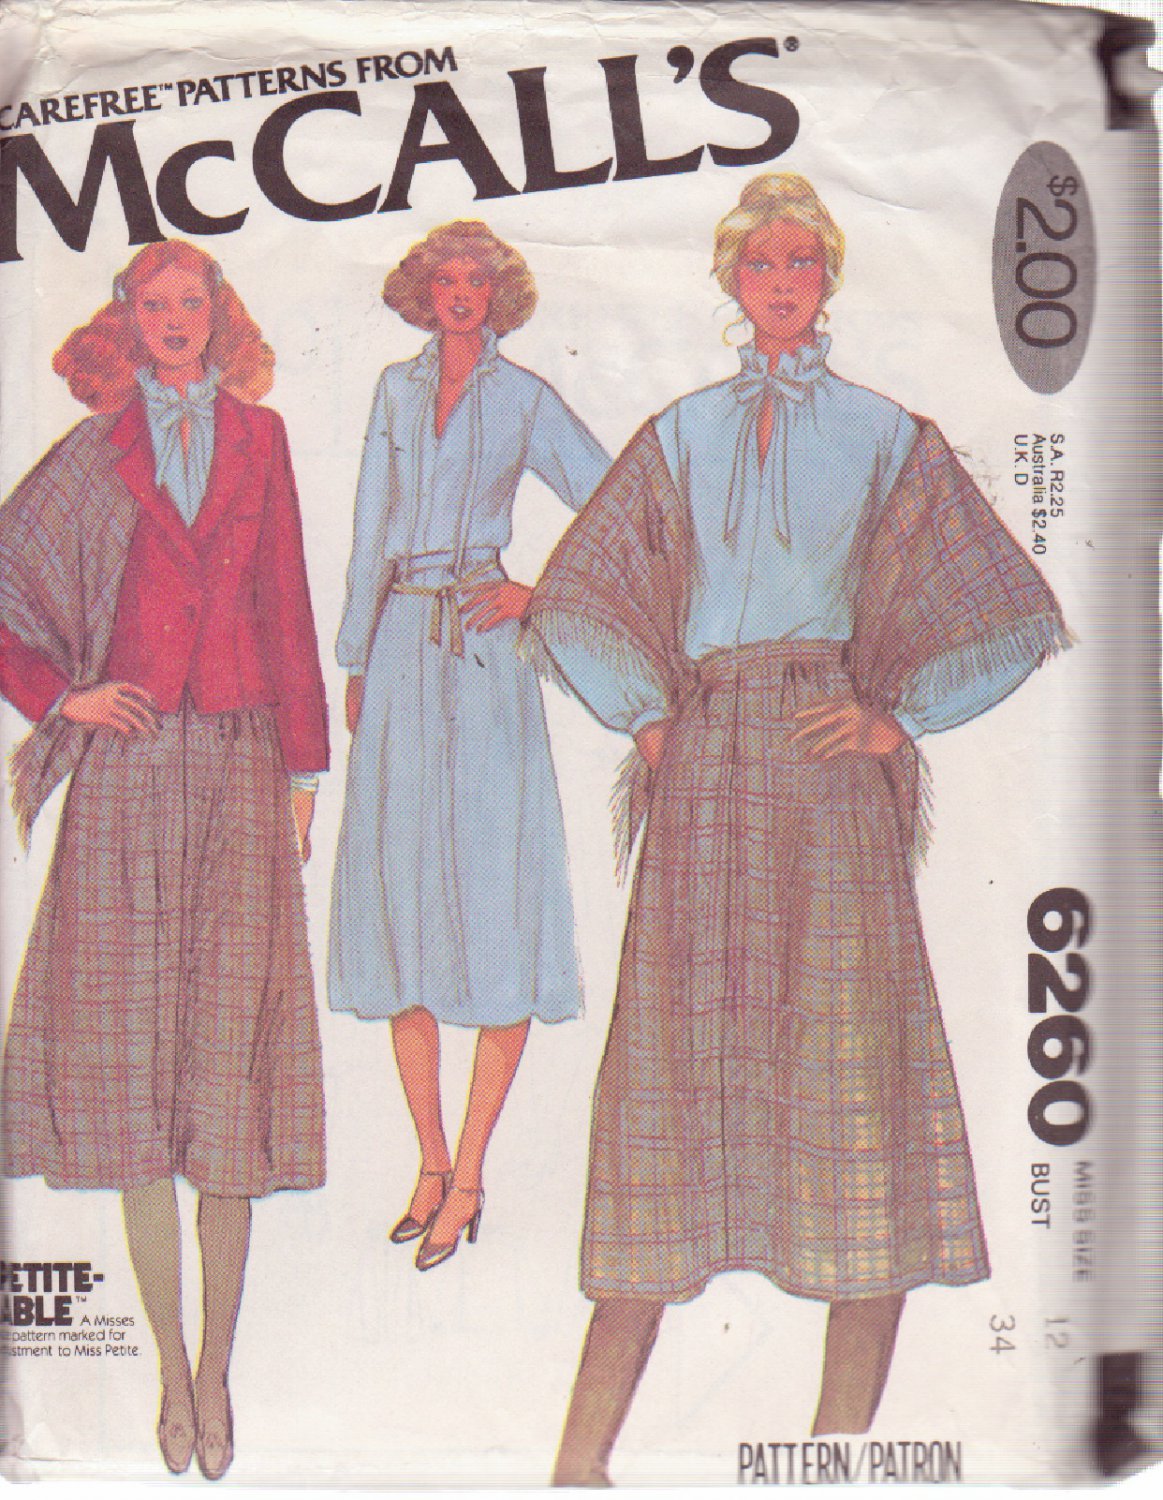 McCALL'S PATTERN 6260 SIZE 12 MISSES' UNLINED JACKET, BLOUSE, SKIRT ...